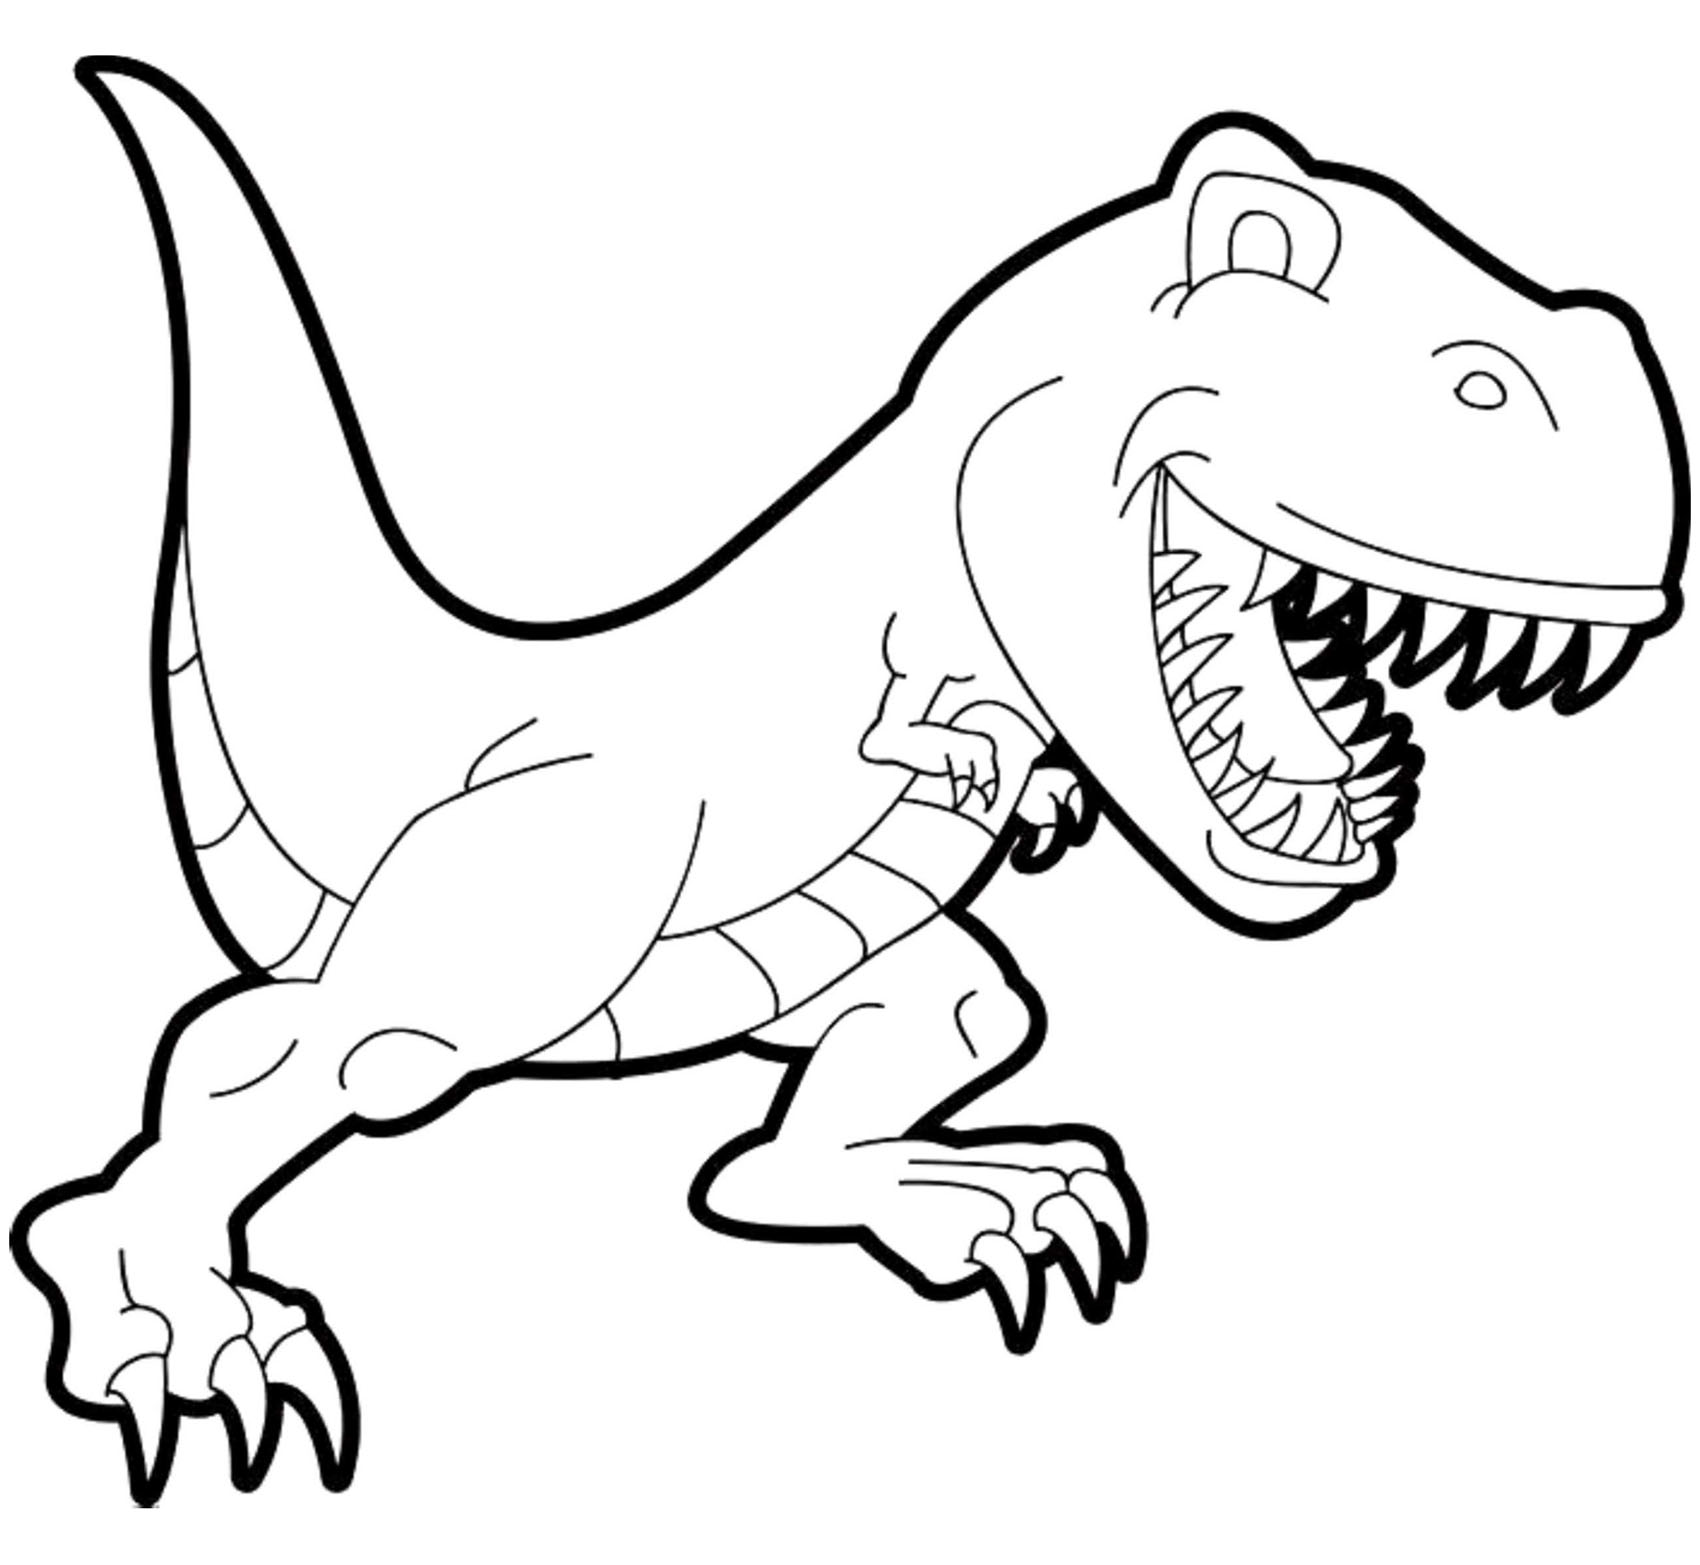 Dinosaurs free to color for kids - Dinosaurs Kids Coloring Pages